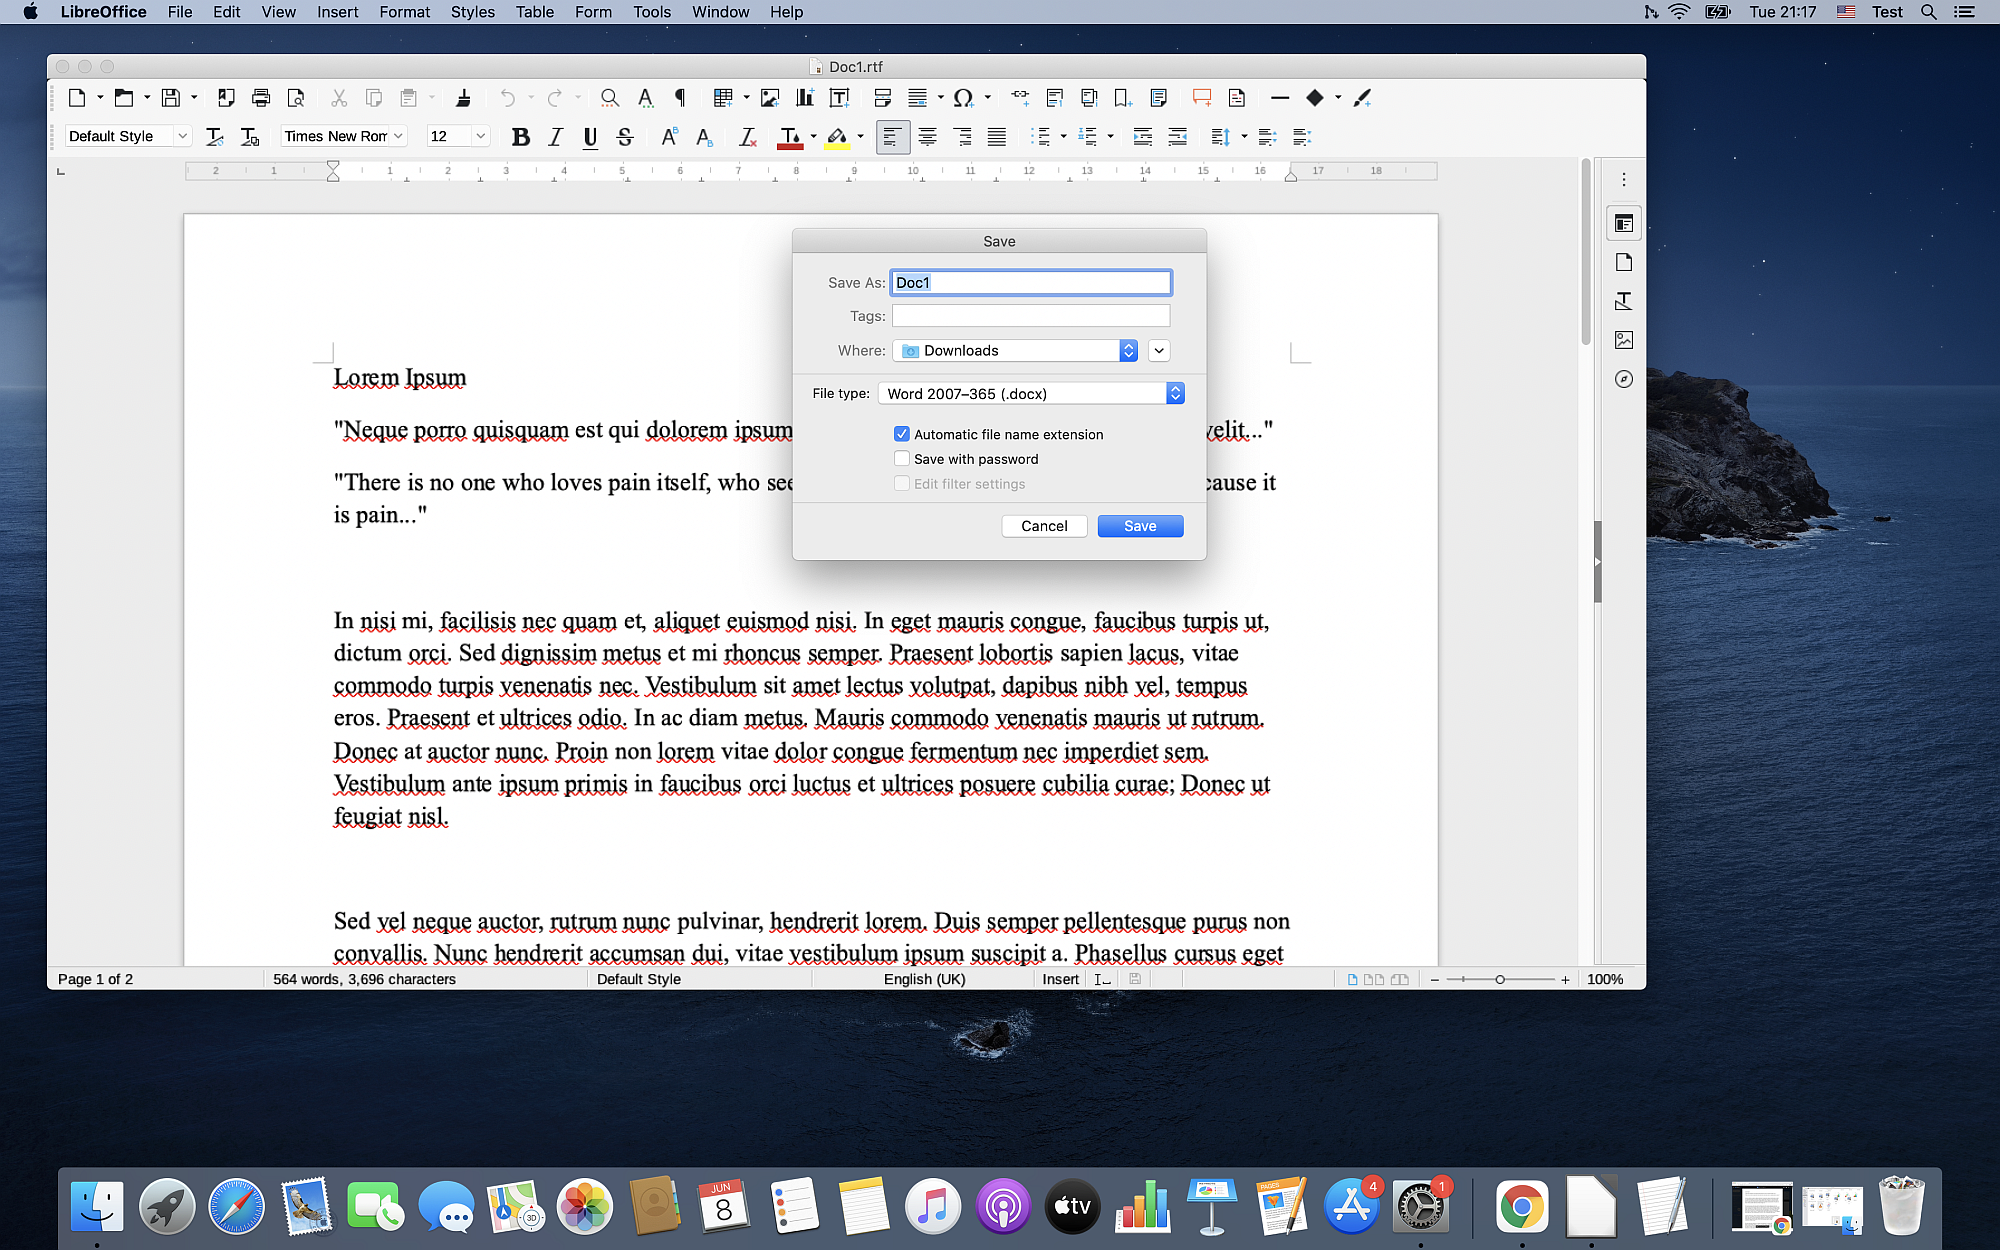 How to use LibreOffice Writer as RTF to DOCX converter on Mac?